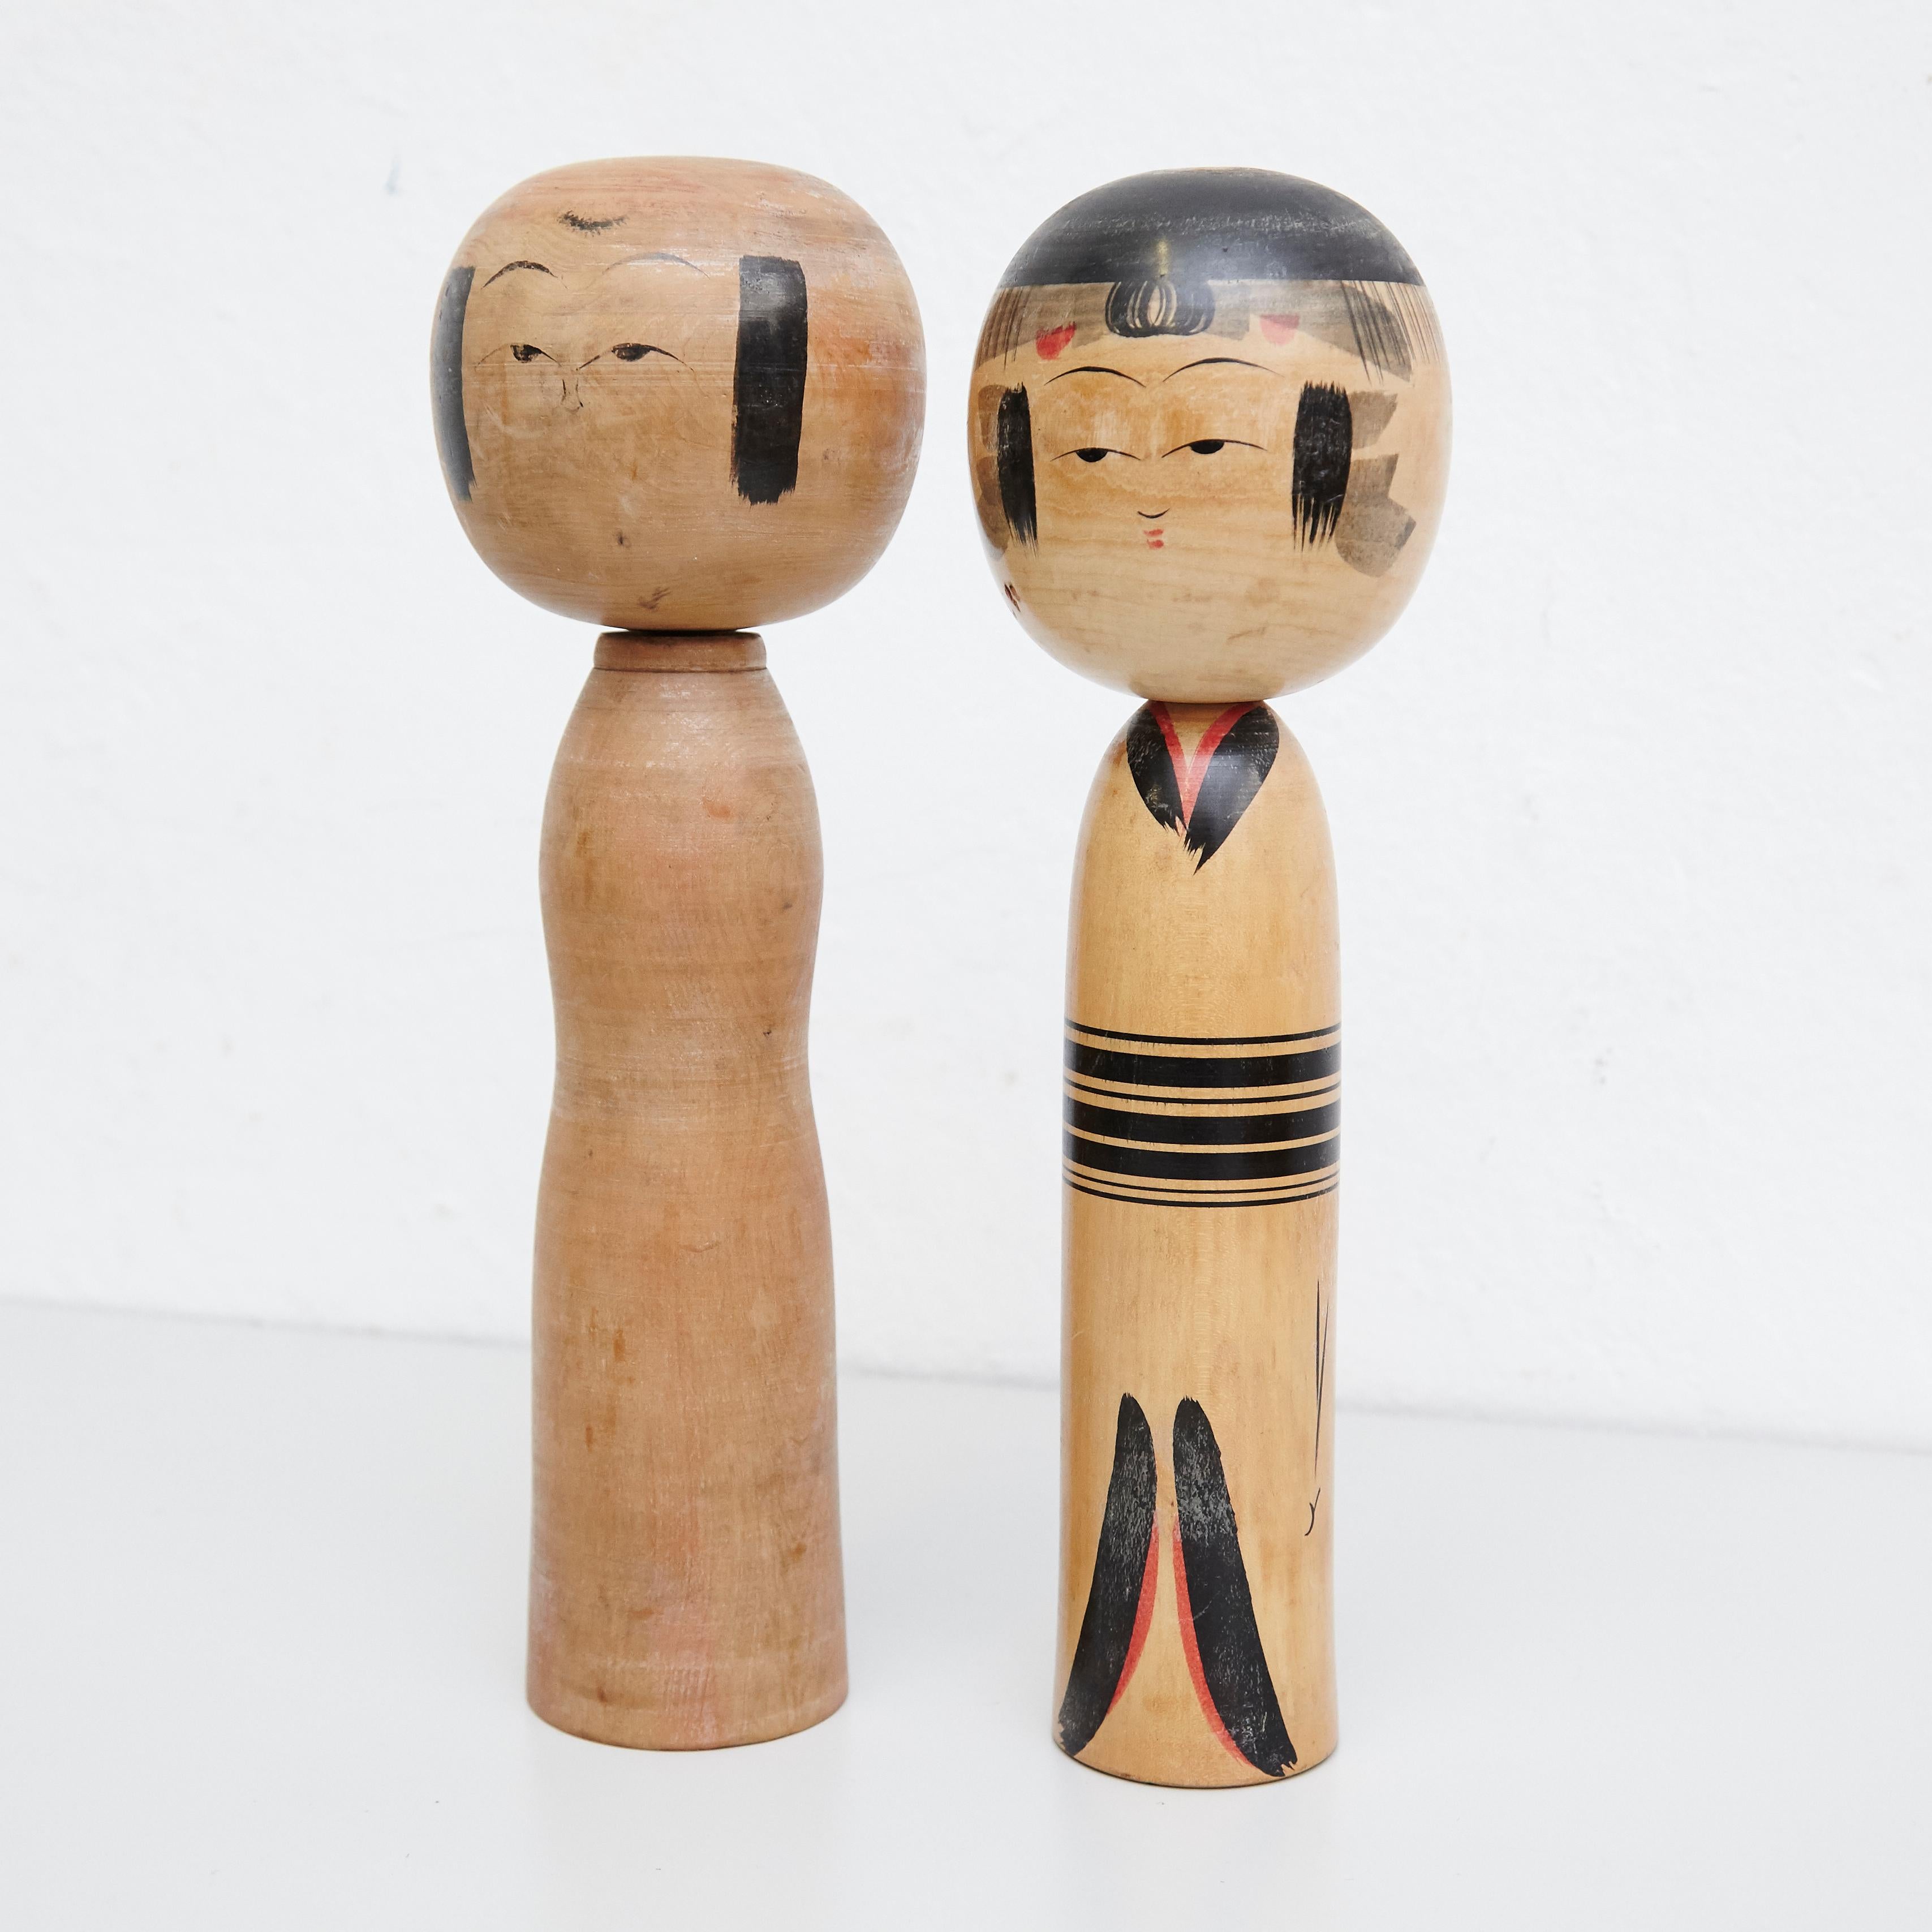 Japanese dolls called Kokeshi of the early 20th century.
Provenance from the northern Japan.
Set of 2.

Measures: 

31 x 9 cm
31 x 9,5 cm


Handmade by Japanese artisants from wood. Have a simple trunk as a body and an enlarged head. One